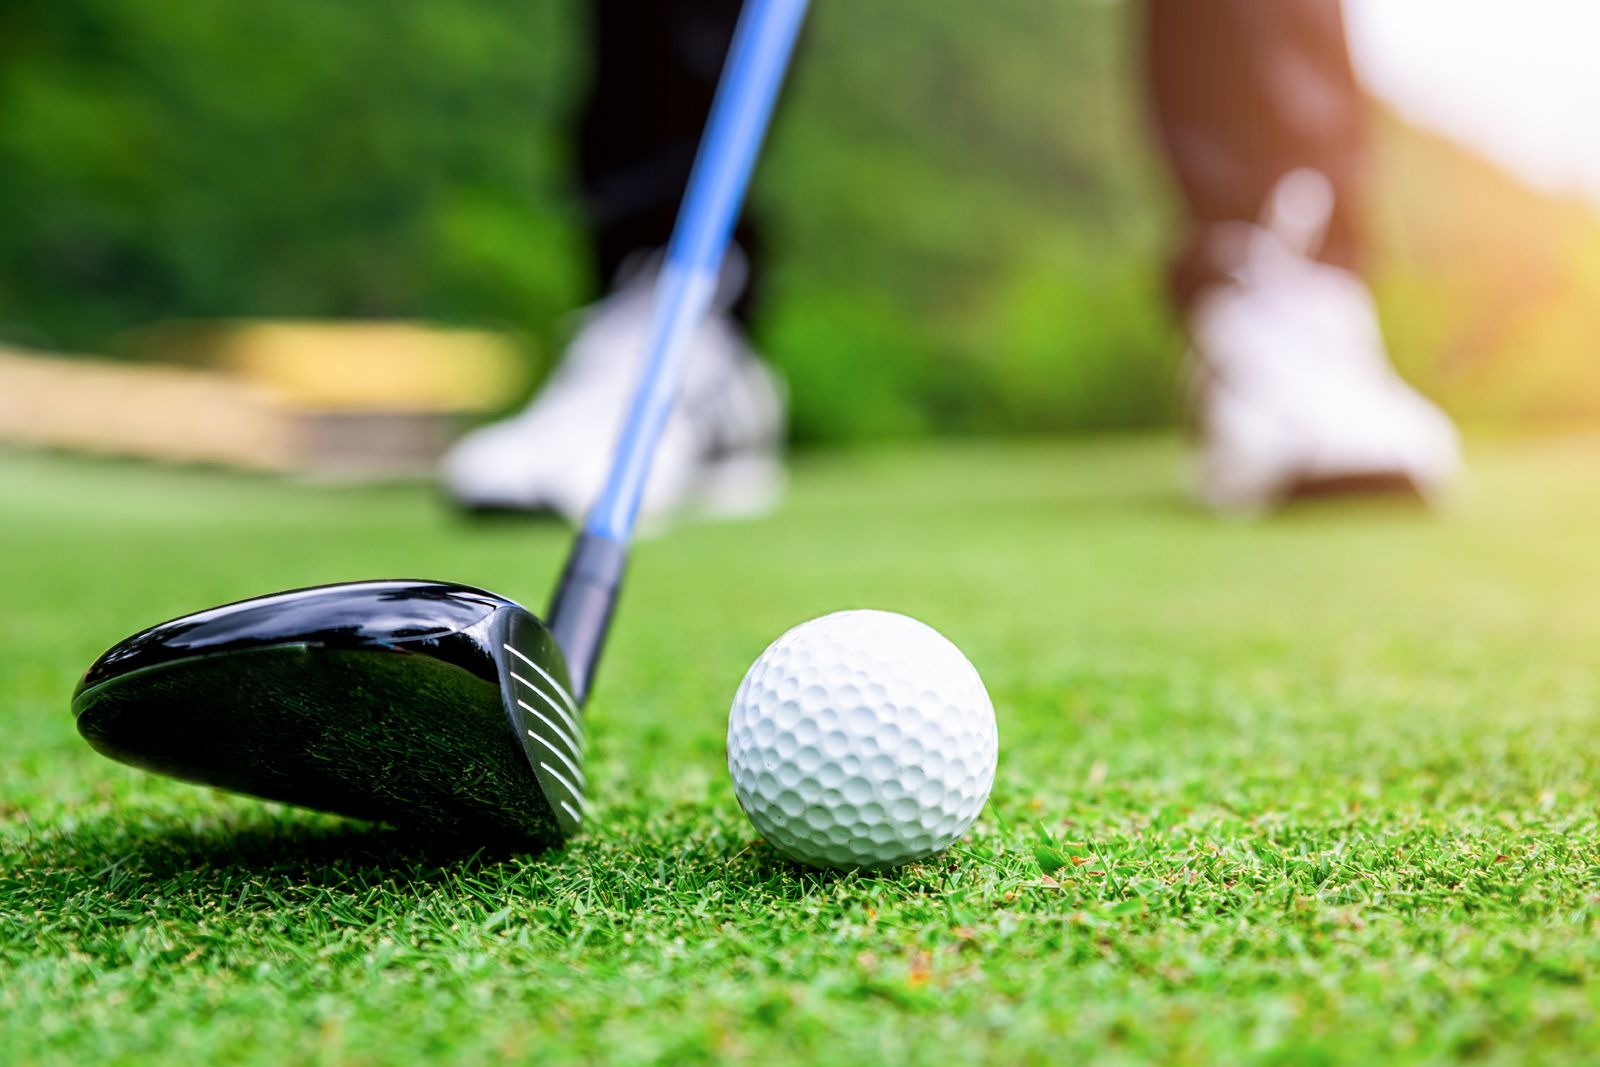 relax and unwind at Innsbrook golf